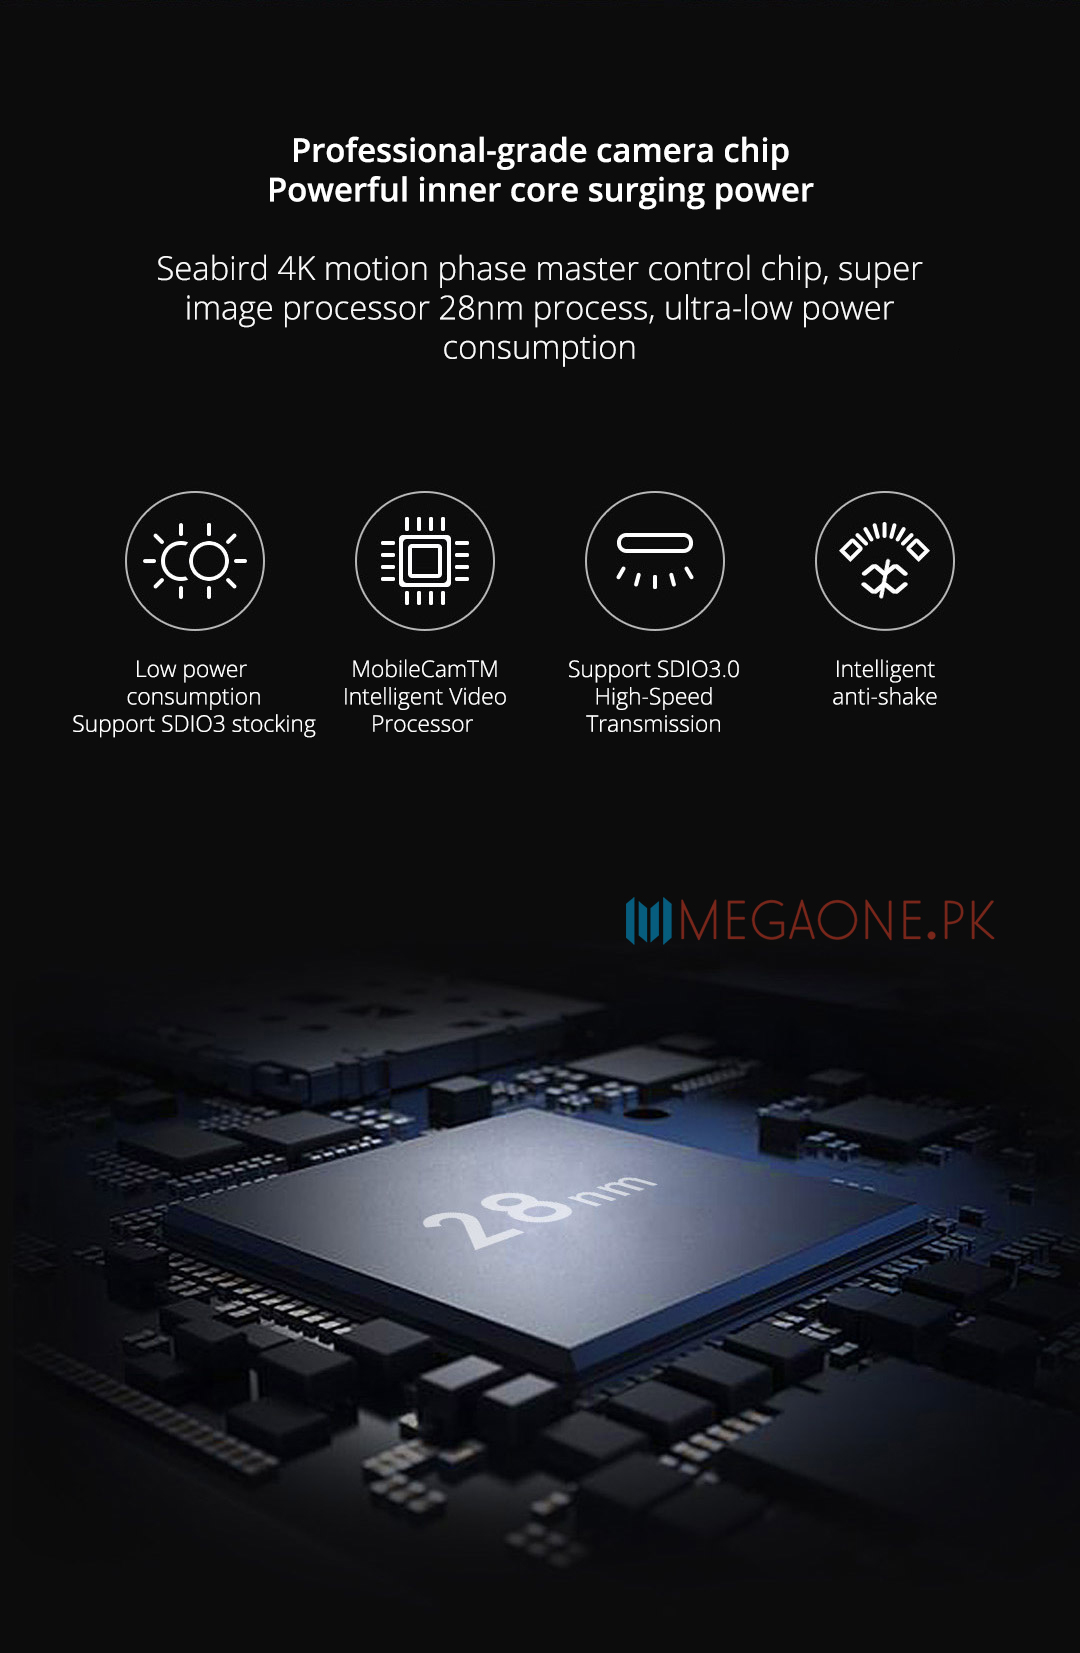 Seabird 4K motion phase master control chip, super image processor 28nm process, ultra-low power consumption